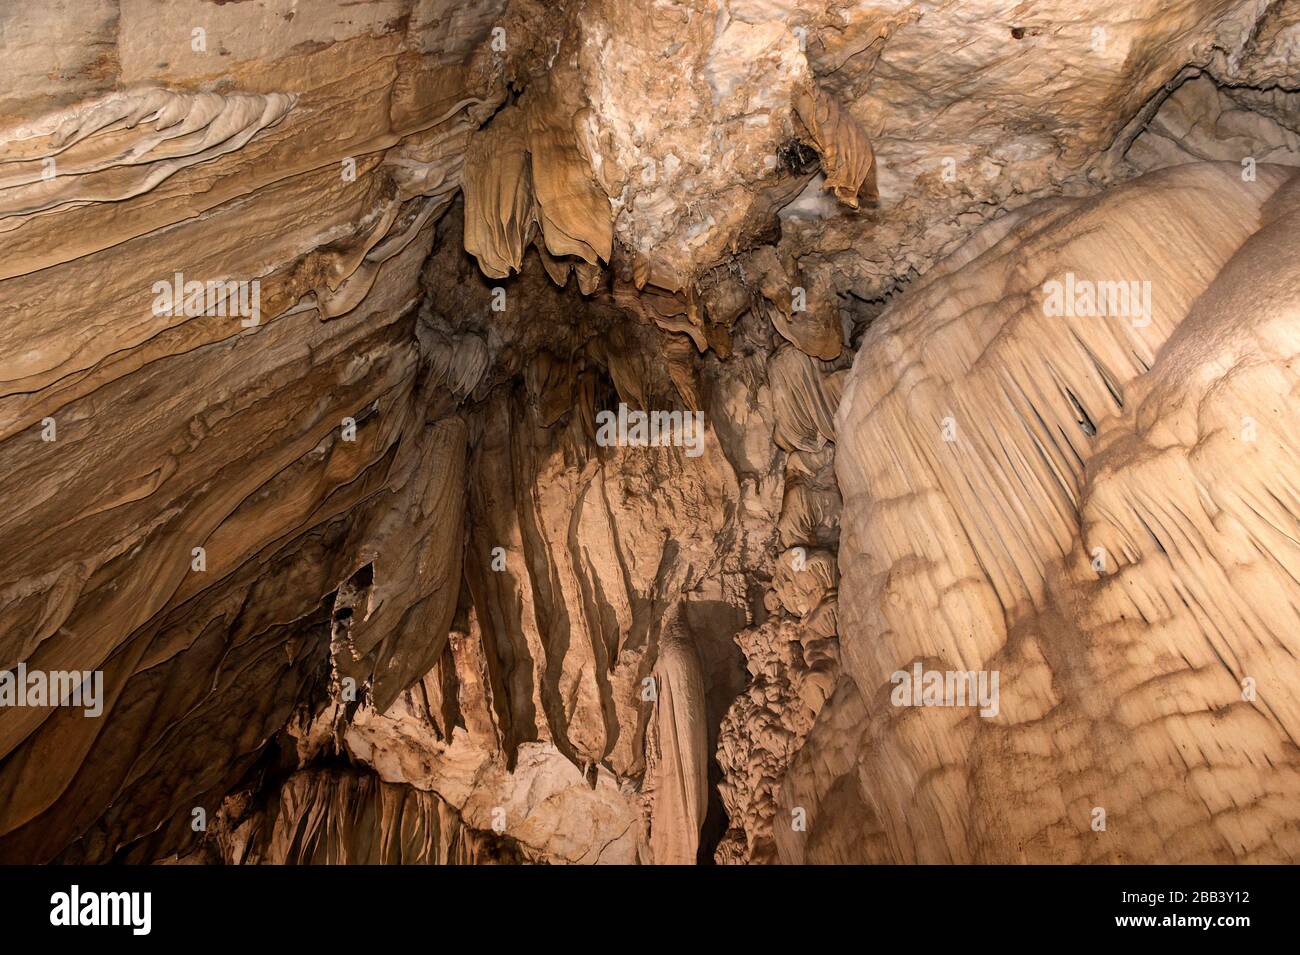 Amazingly shaped calcite deposits, speleothems, created by drippling water at the cave wall, Lang Cave, Gunung Mulu National Park, Sarawak, Borneo, Stock Photo